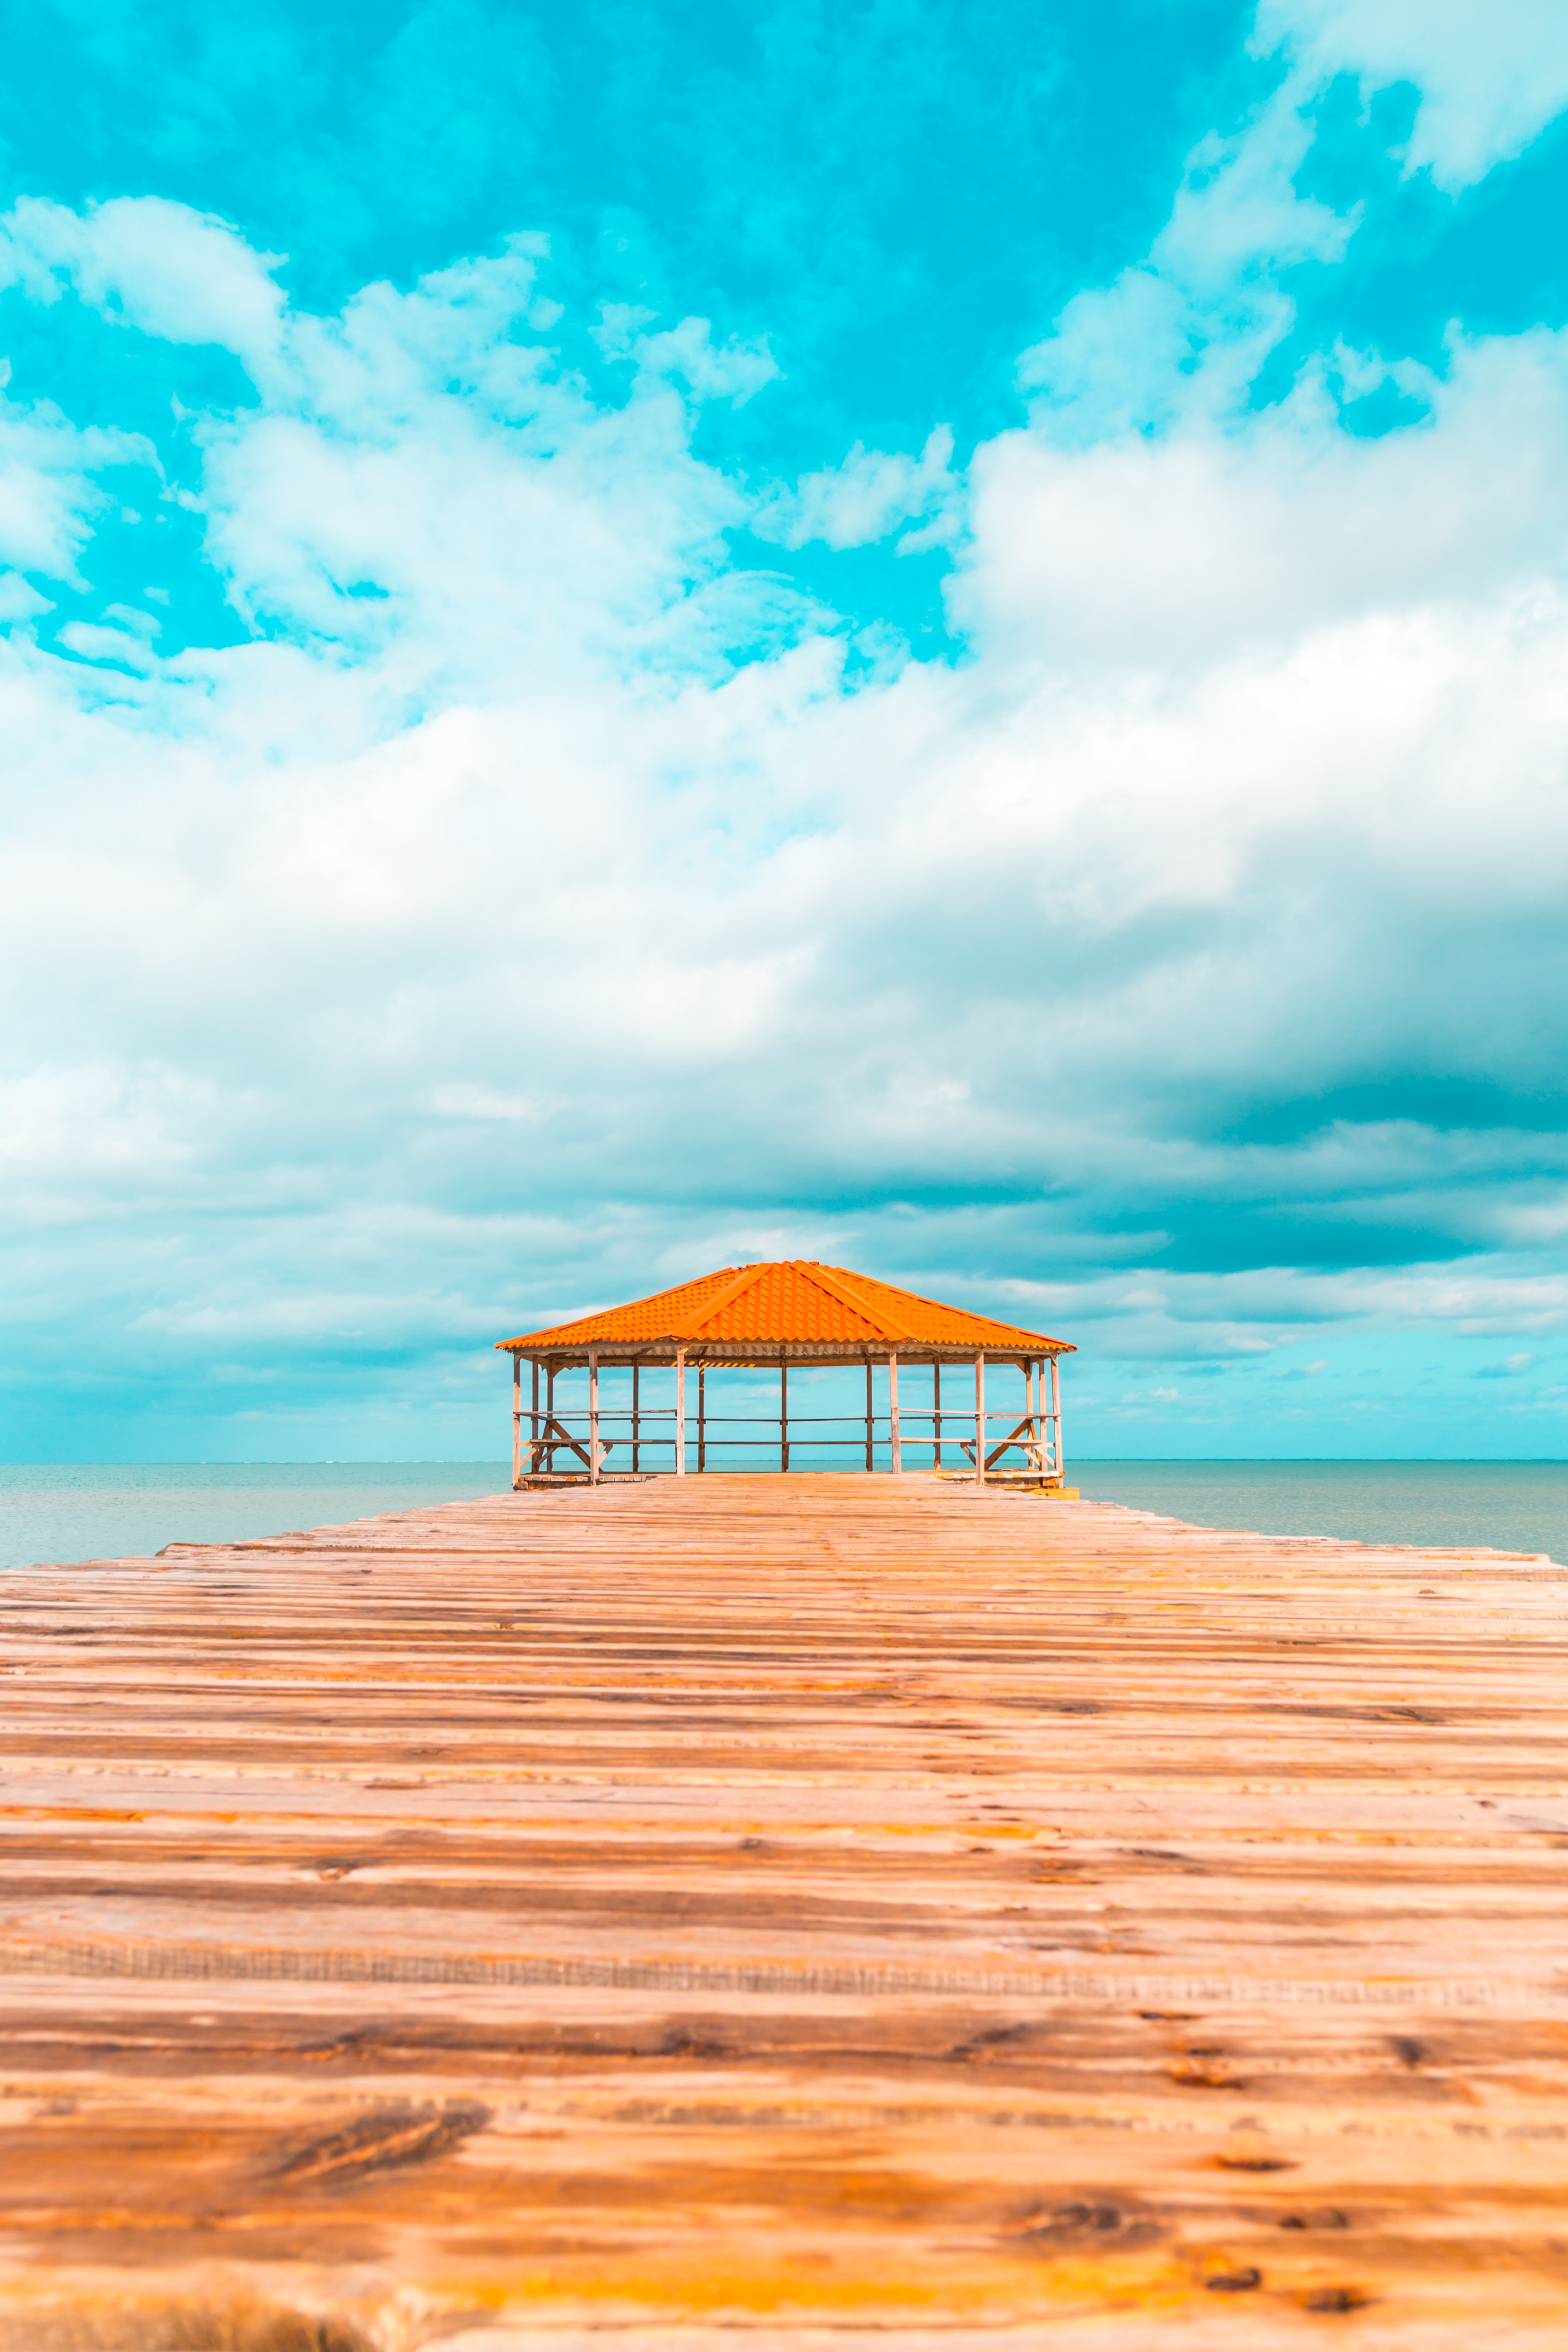 rest, relaxation, pier, nature, clouds, ocean, tropics, alcove, bower